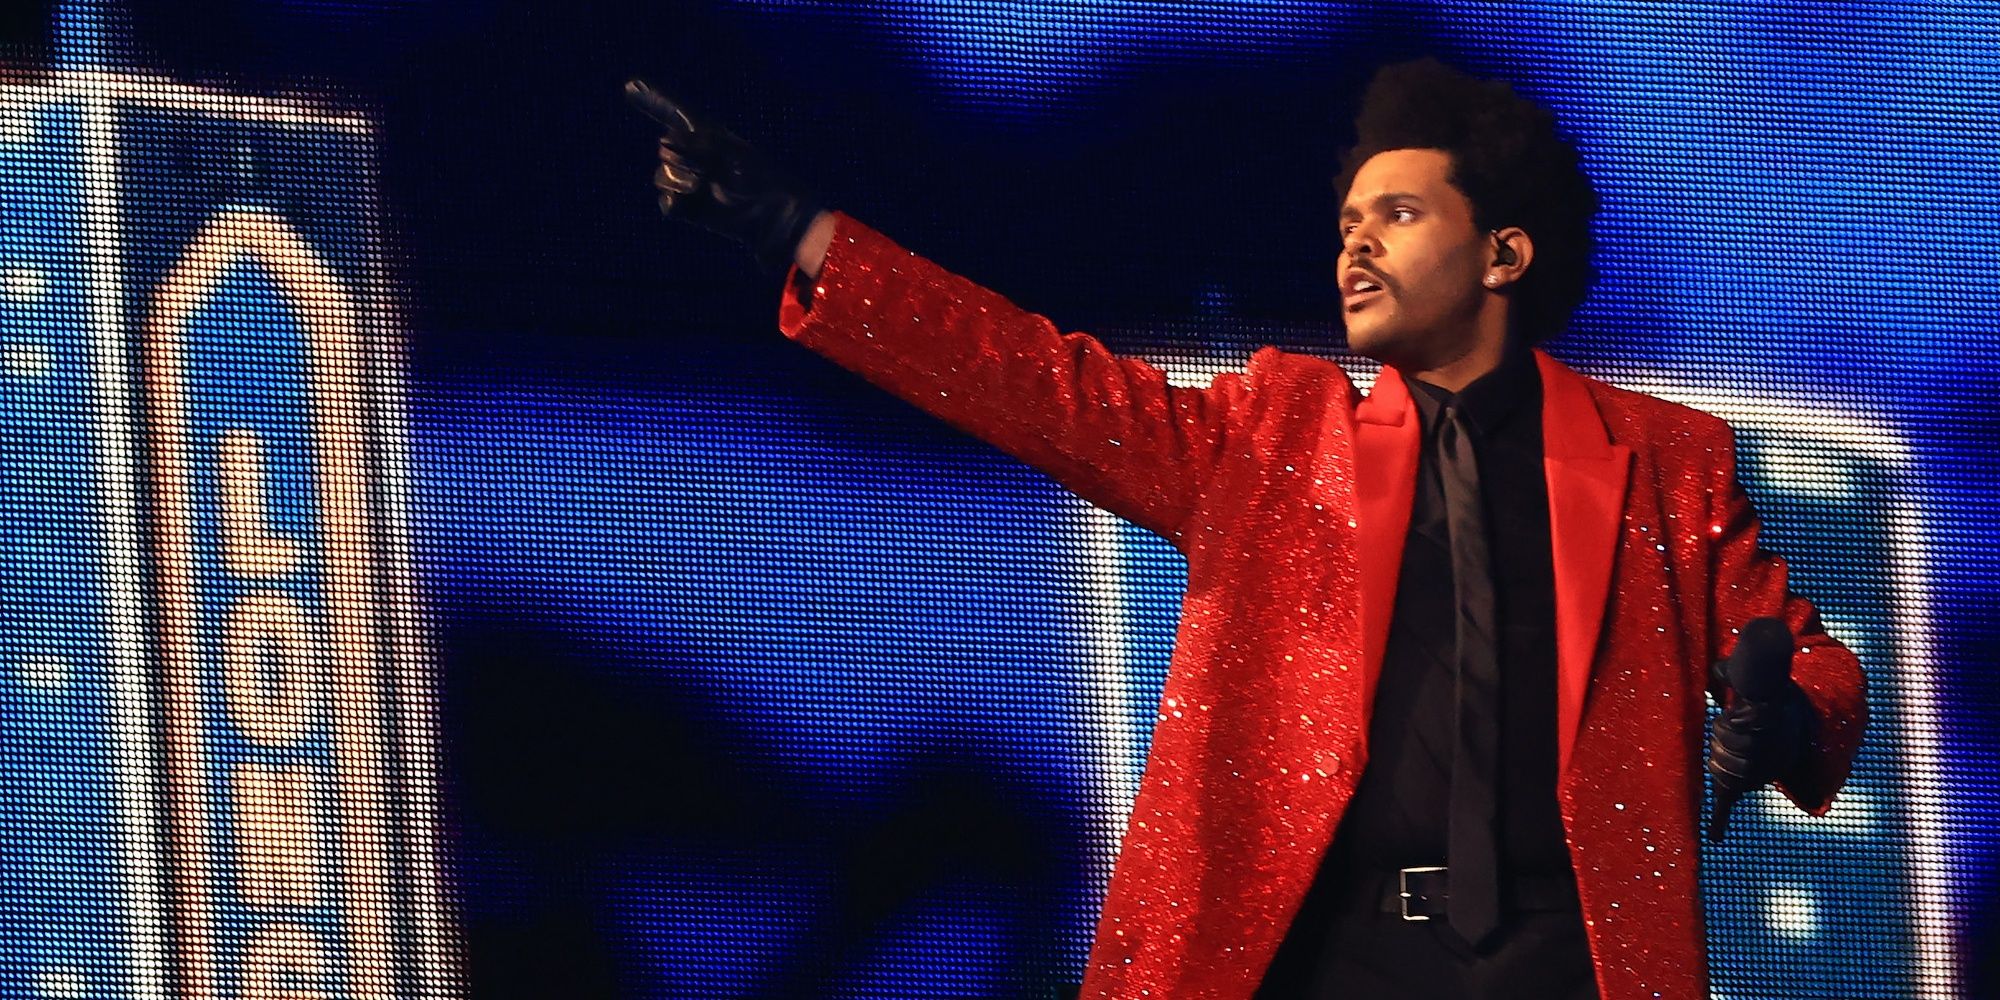 The Weeknd raising an arm in a still from The Show